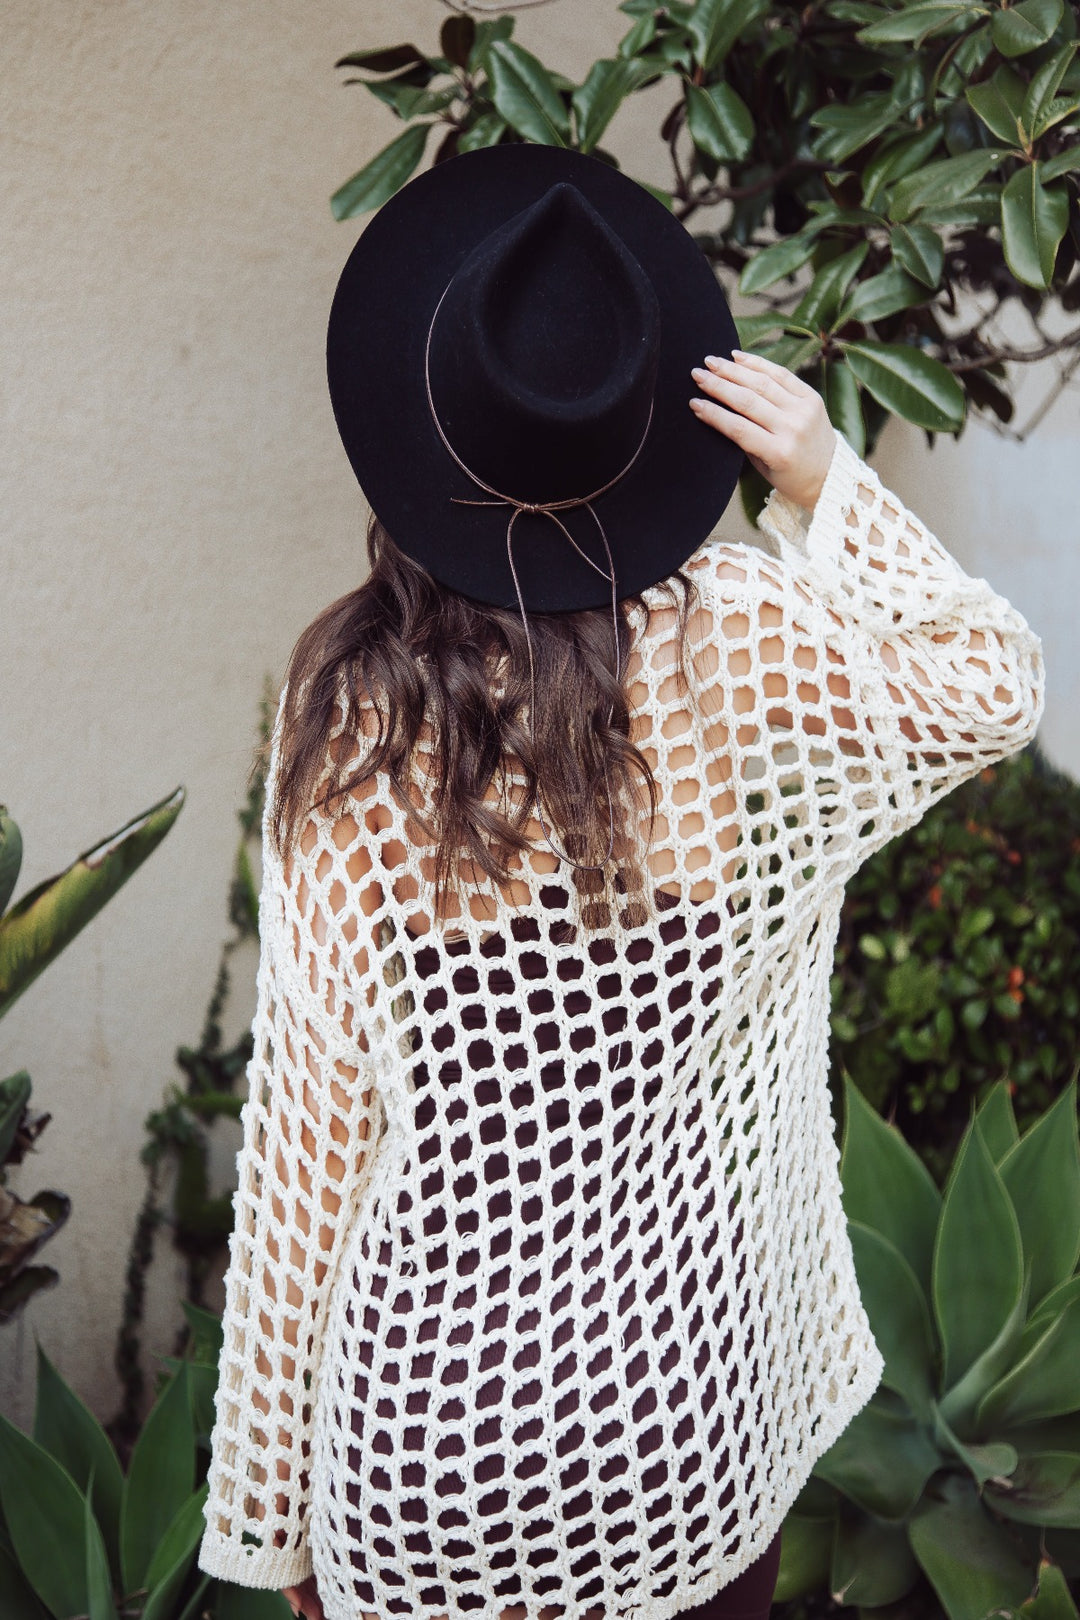 LACY CROCHET KNITTED LONG SLEEVE TOP